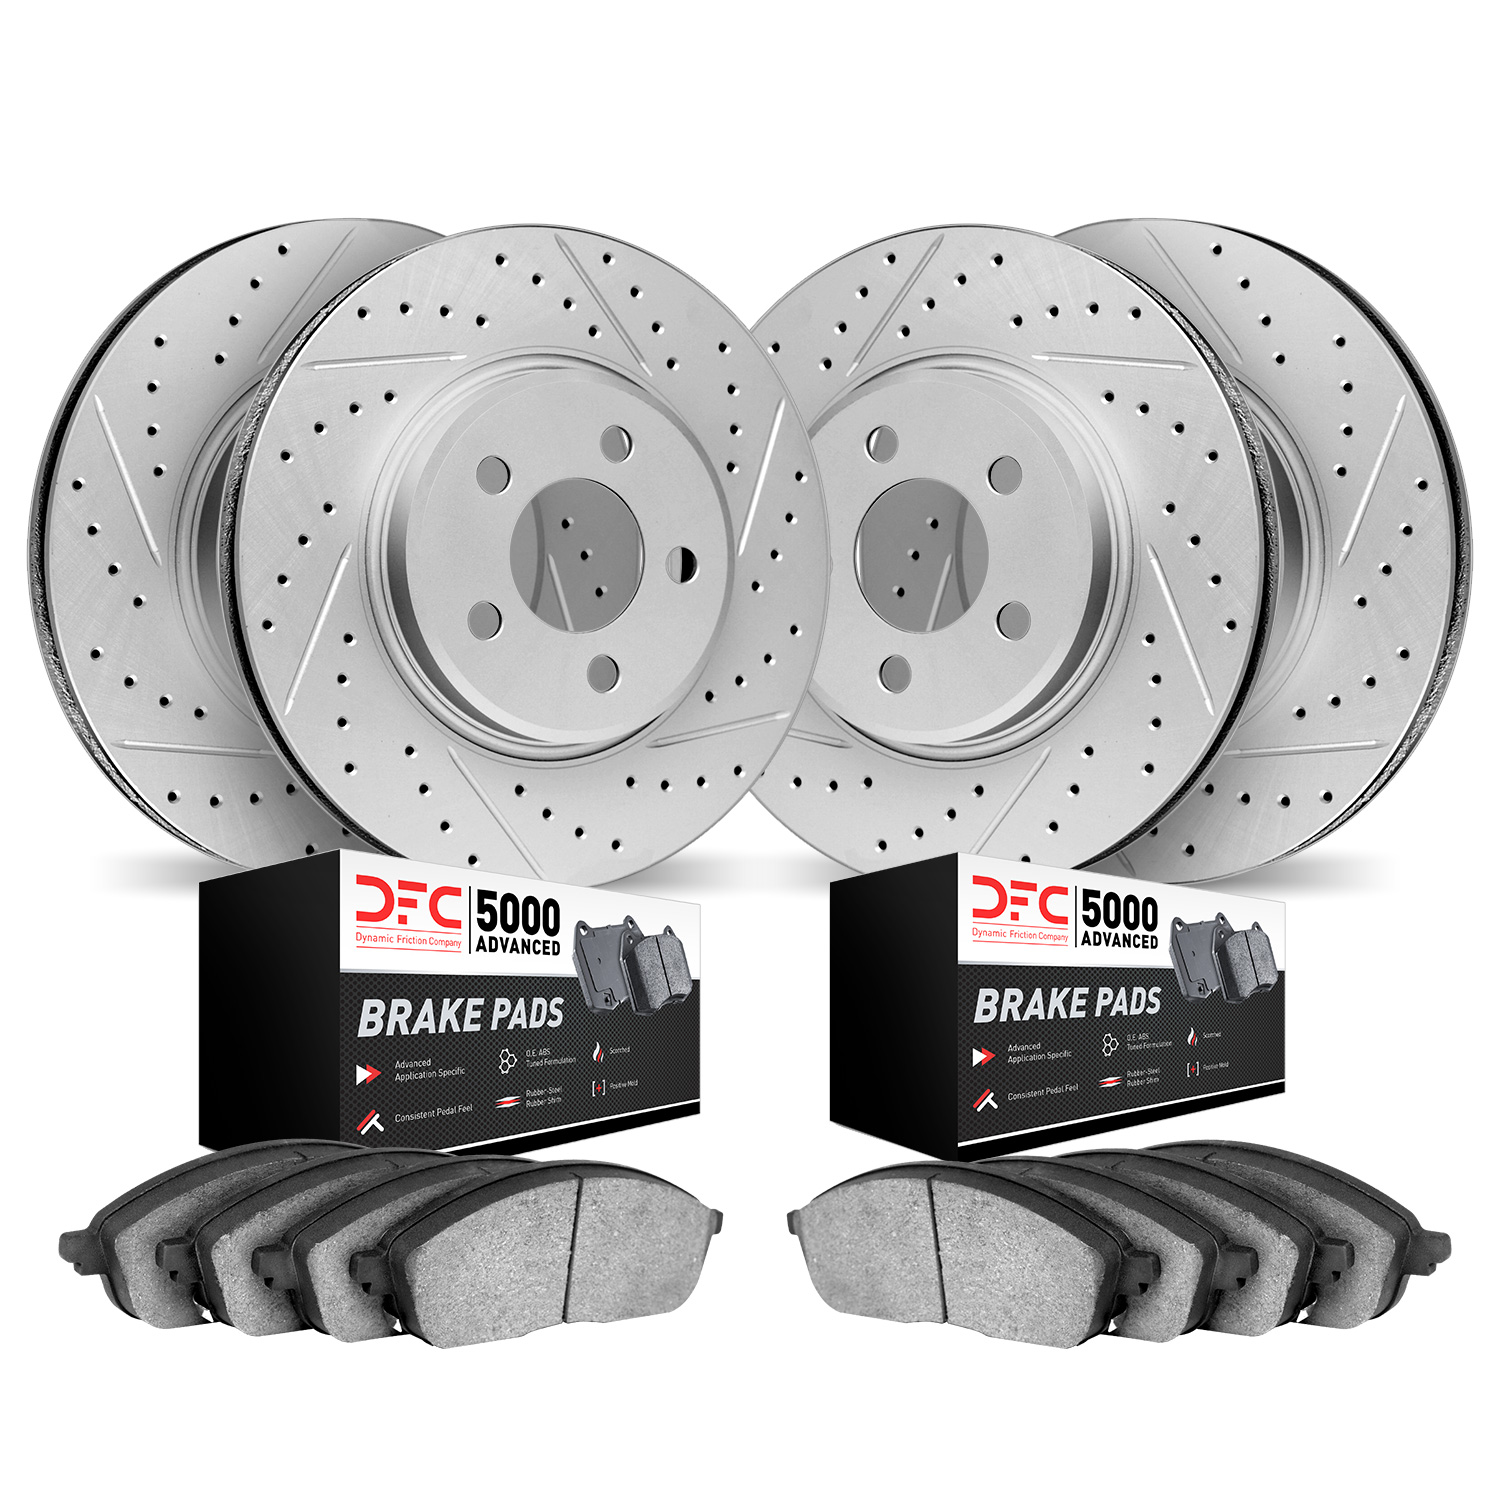 2504-72023 Geoperformance Drilled/Slotted Rotors w/5000 Advanced Brake Pads Kit, 2003-2006 Mitsubishi, Position: Front and Rear